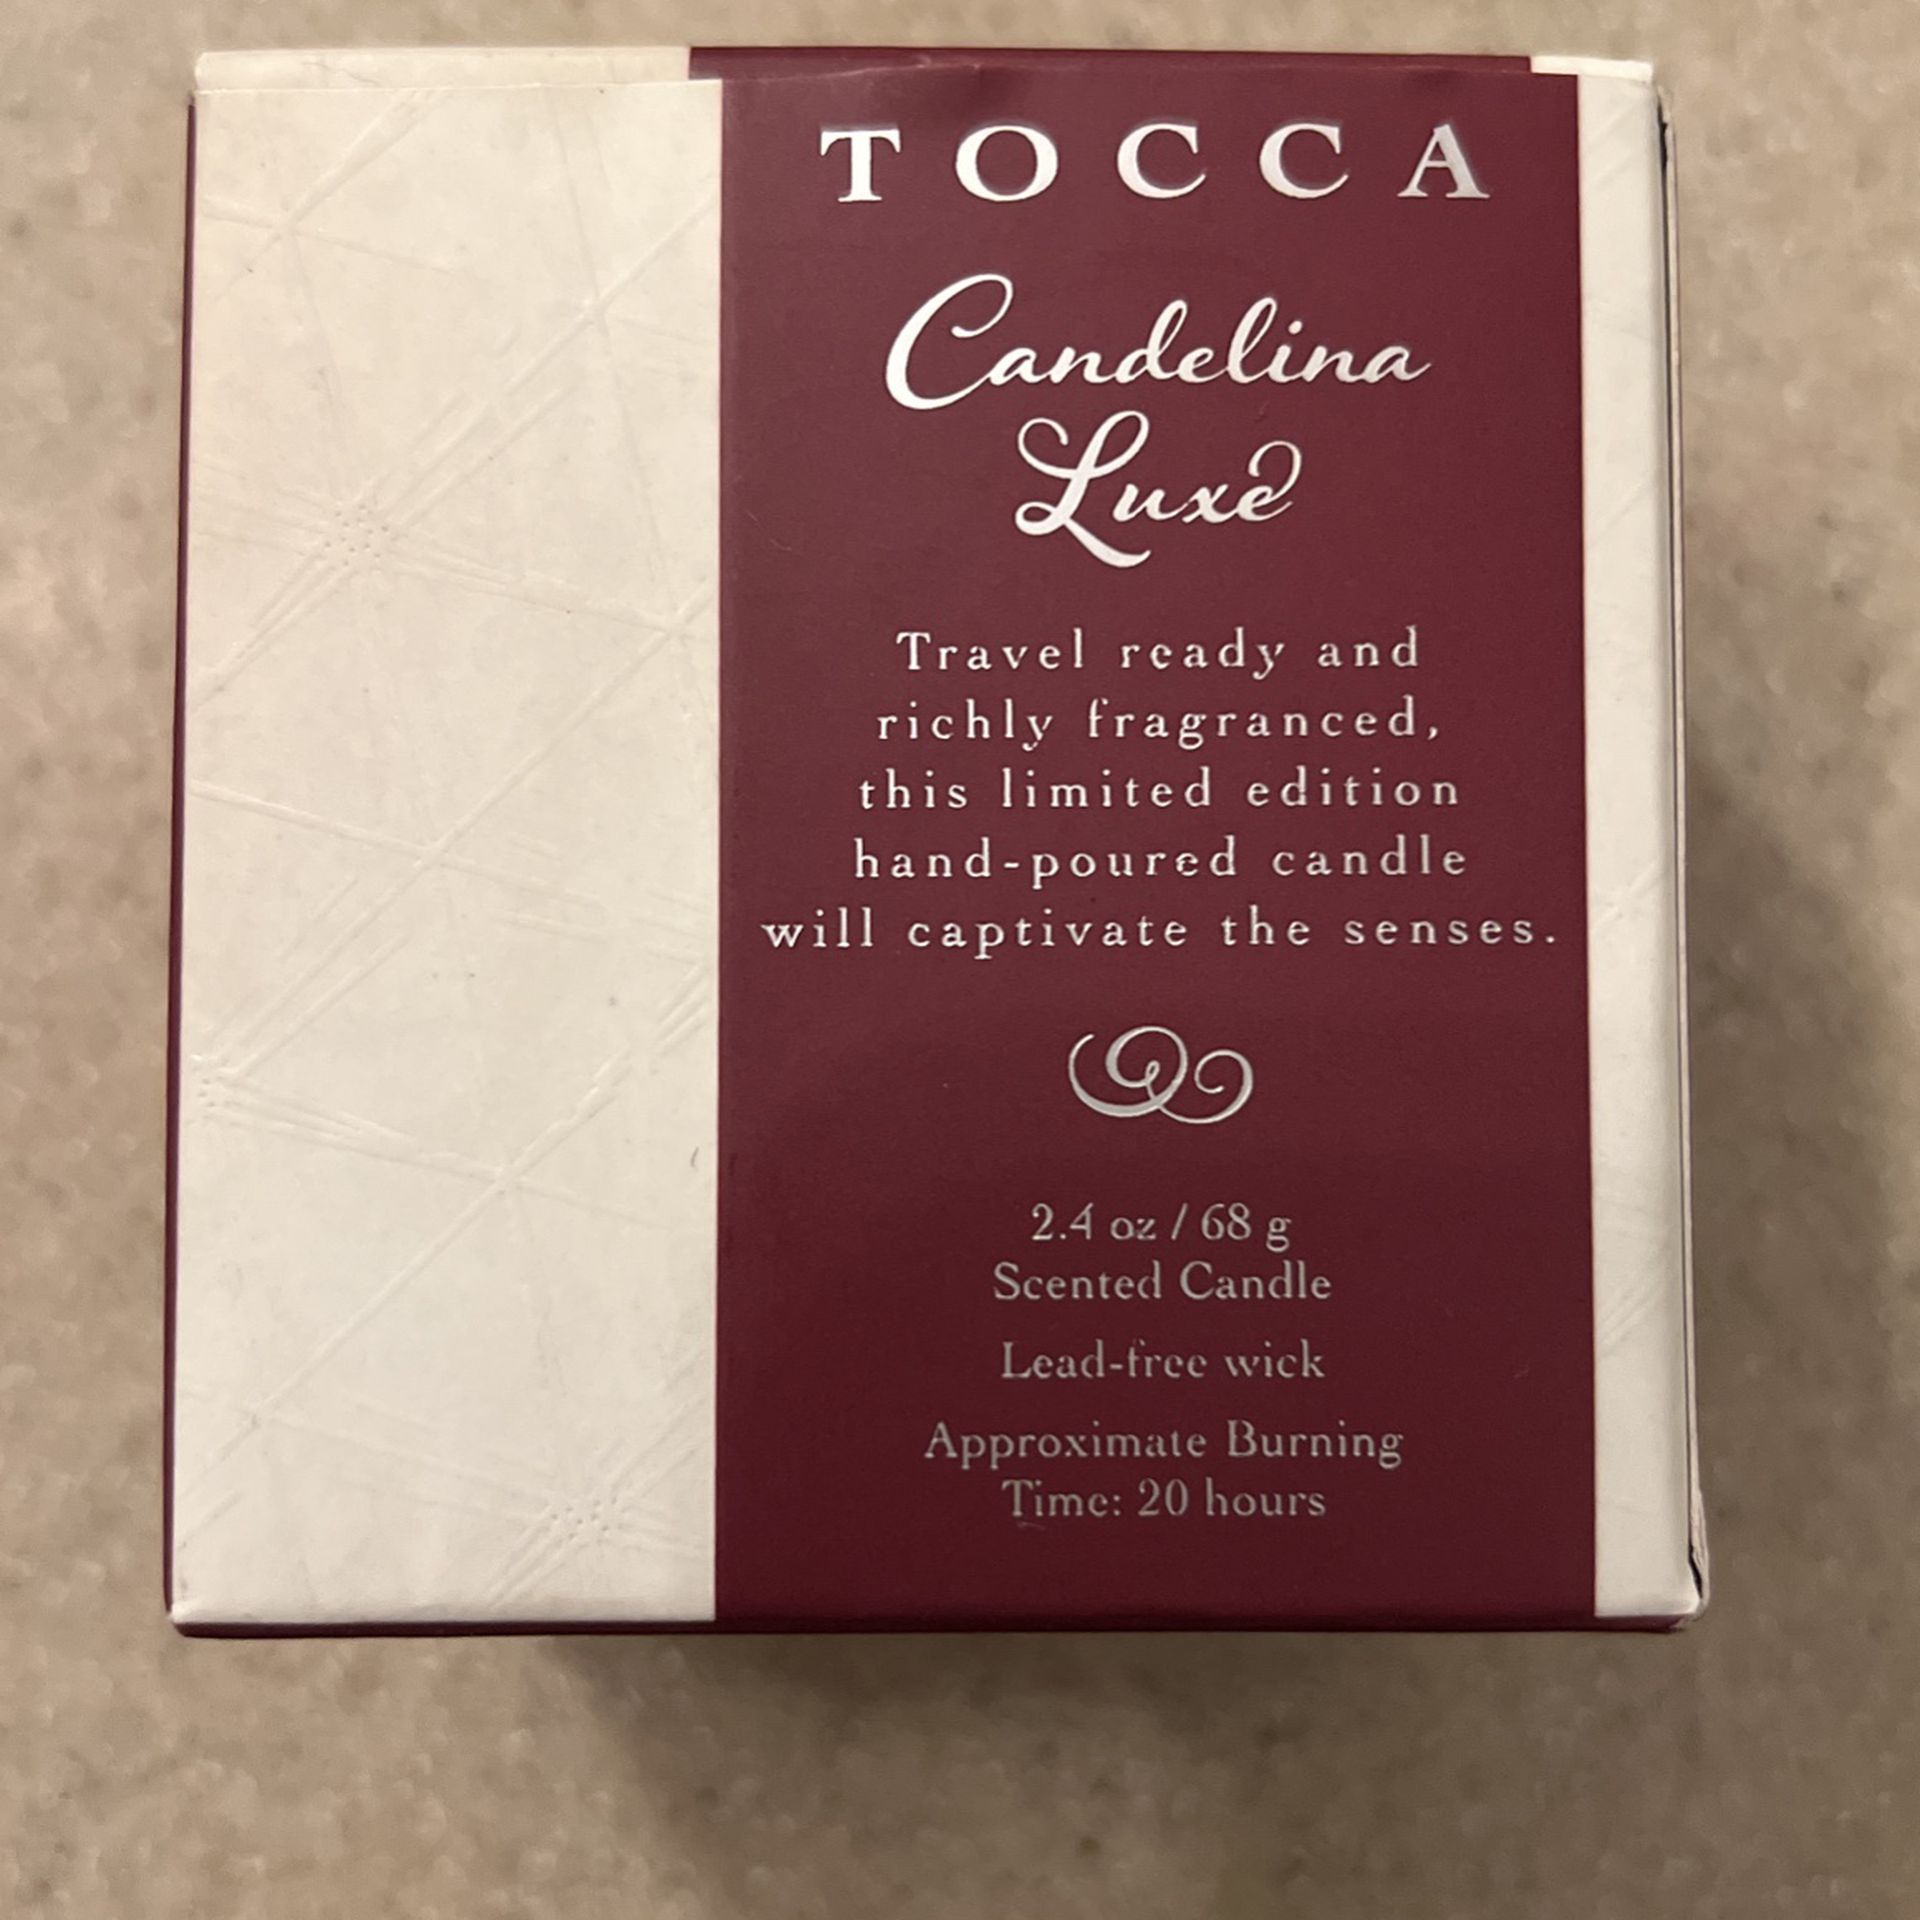 TOCCA CANDELINA LUXE 